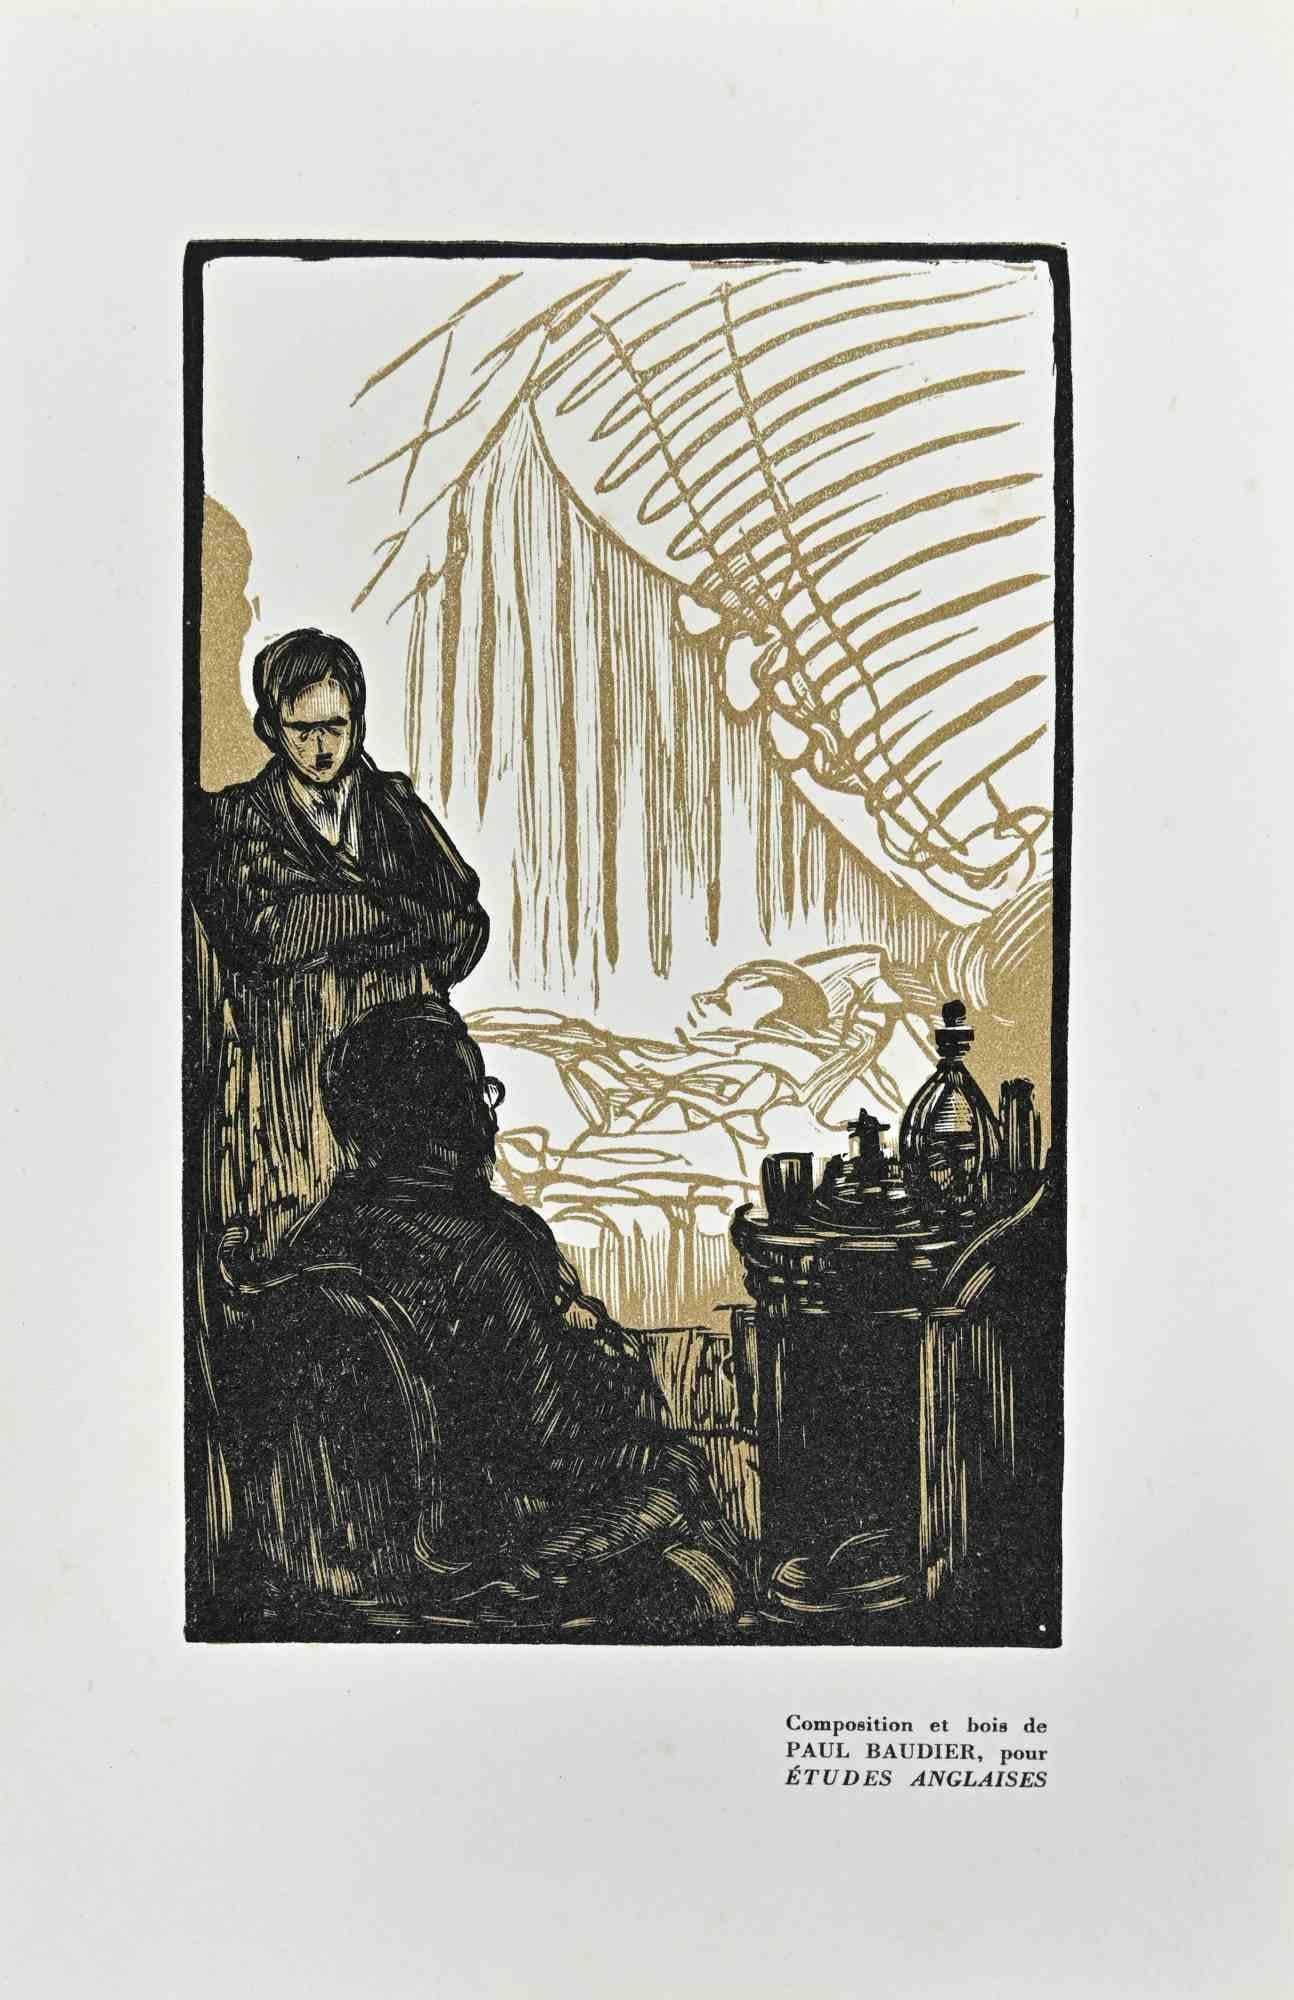 The Sick and Compassionate is an original woodcut print on ivory-colored paper realized by Paul Baudier (1881-1962) in the 1930s.

On the lower right description in French.

Very good conditions.

Paul Baudier, (born October 18, 1881 in Paris and